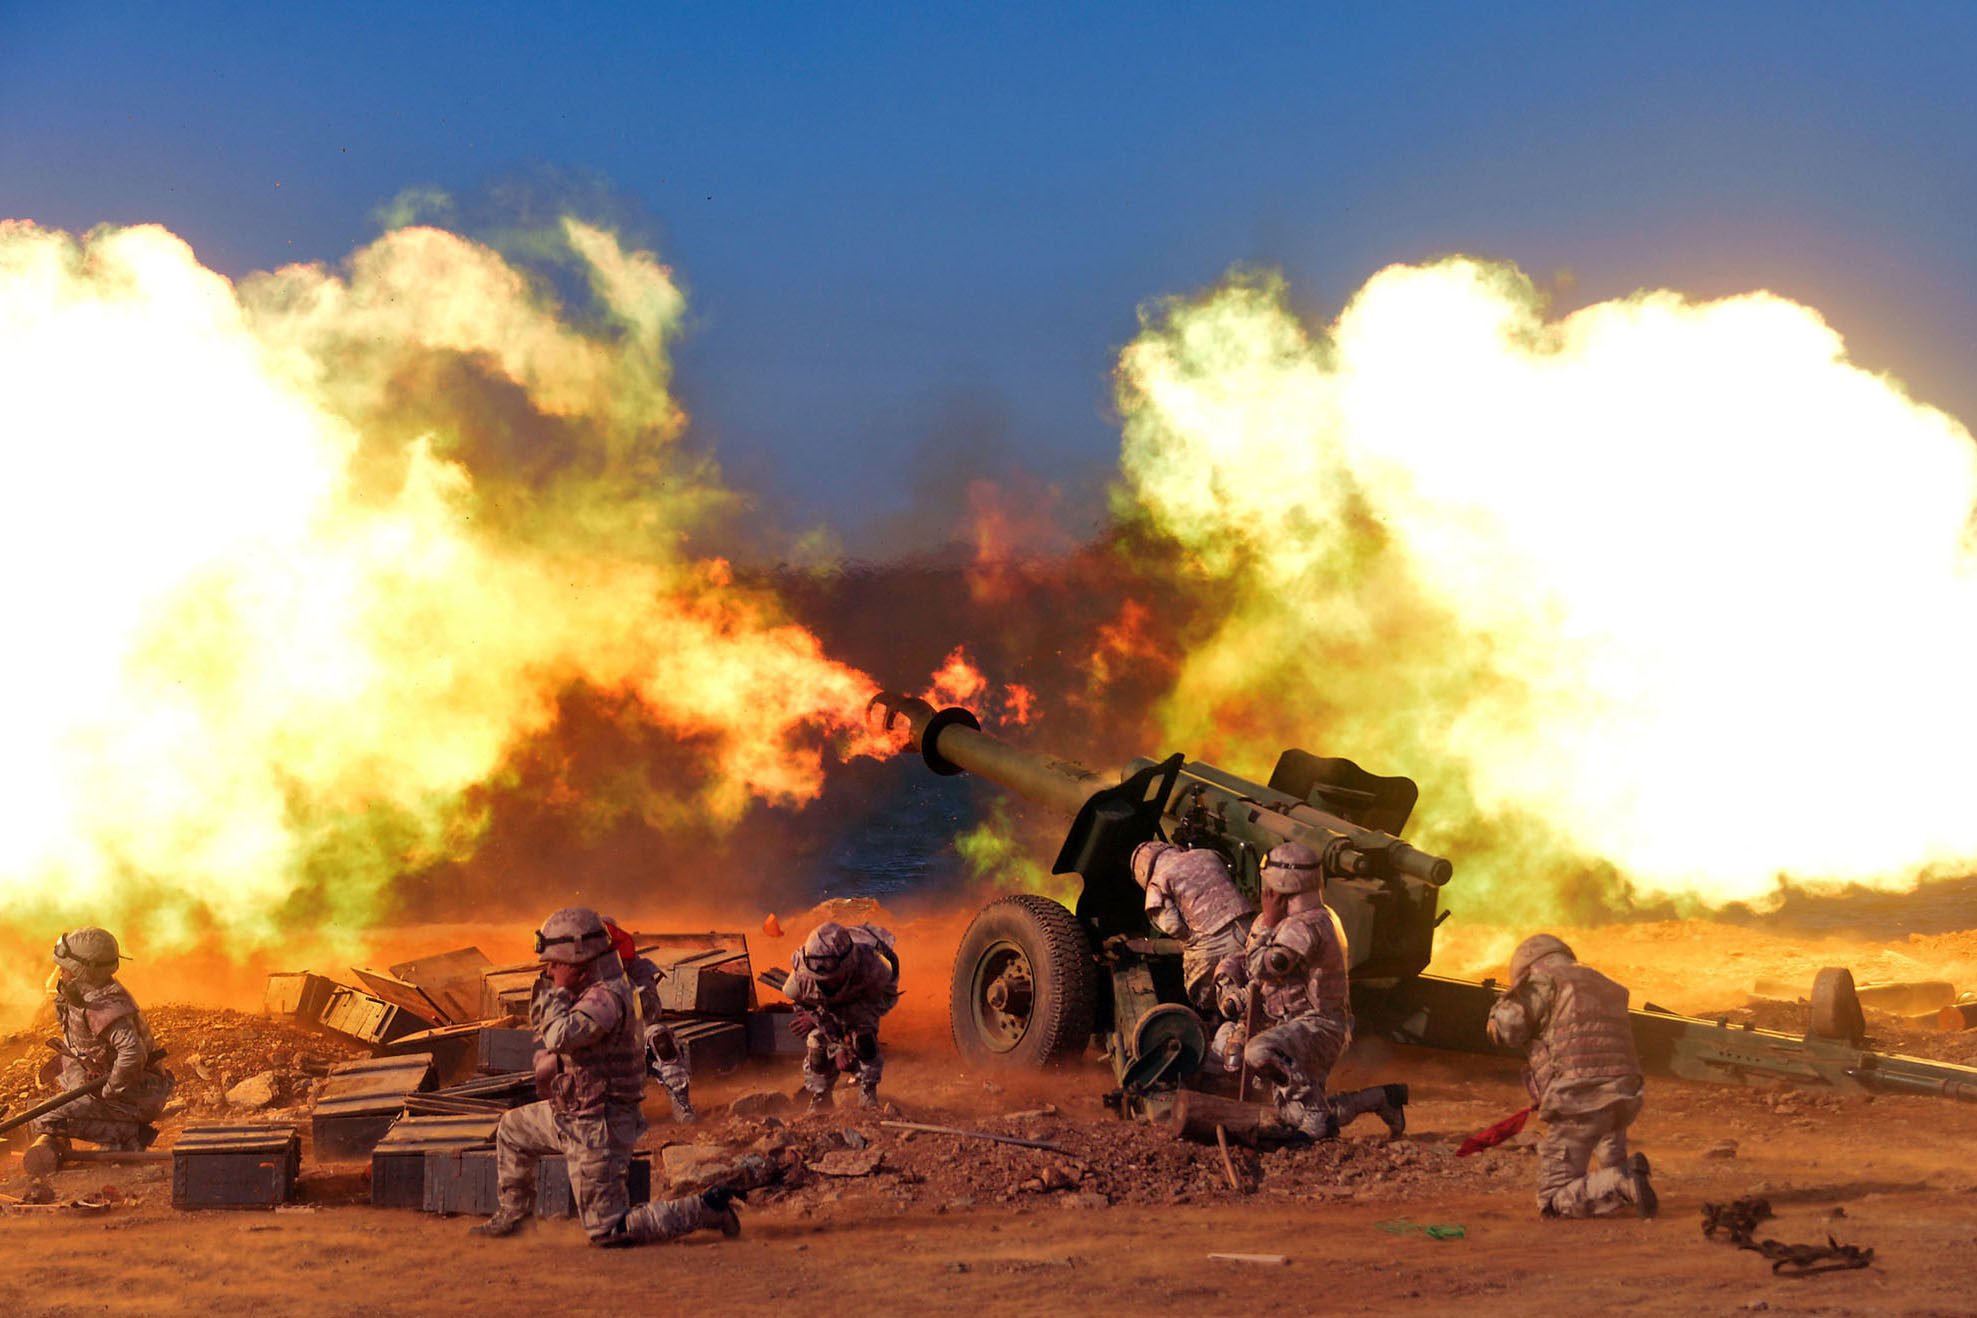 North Korean soldiers fire long-range artillery pieces during a military exercise held in an unknown location last year, in a picture provided by the North Korean state news agency. Photo: KCNA/KNS/dpa